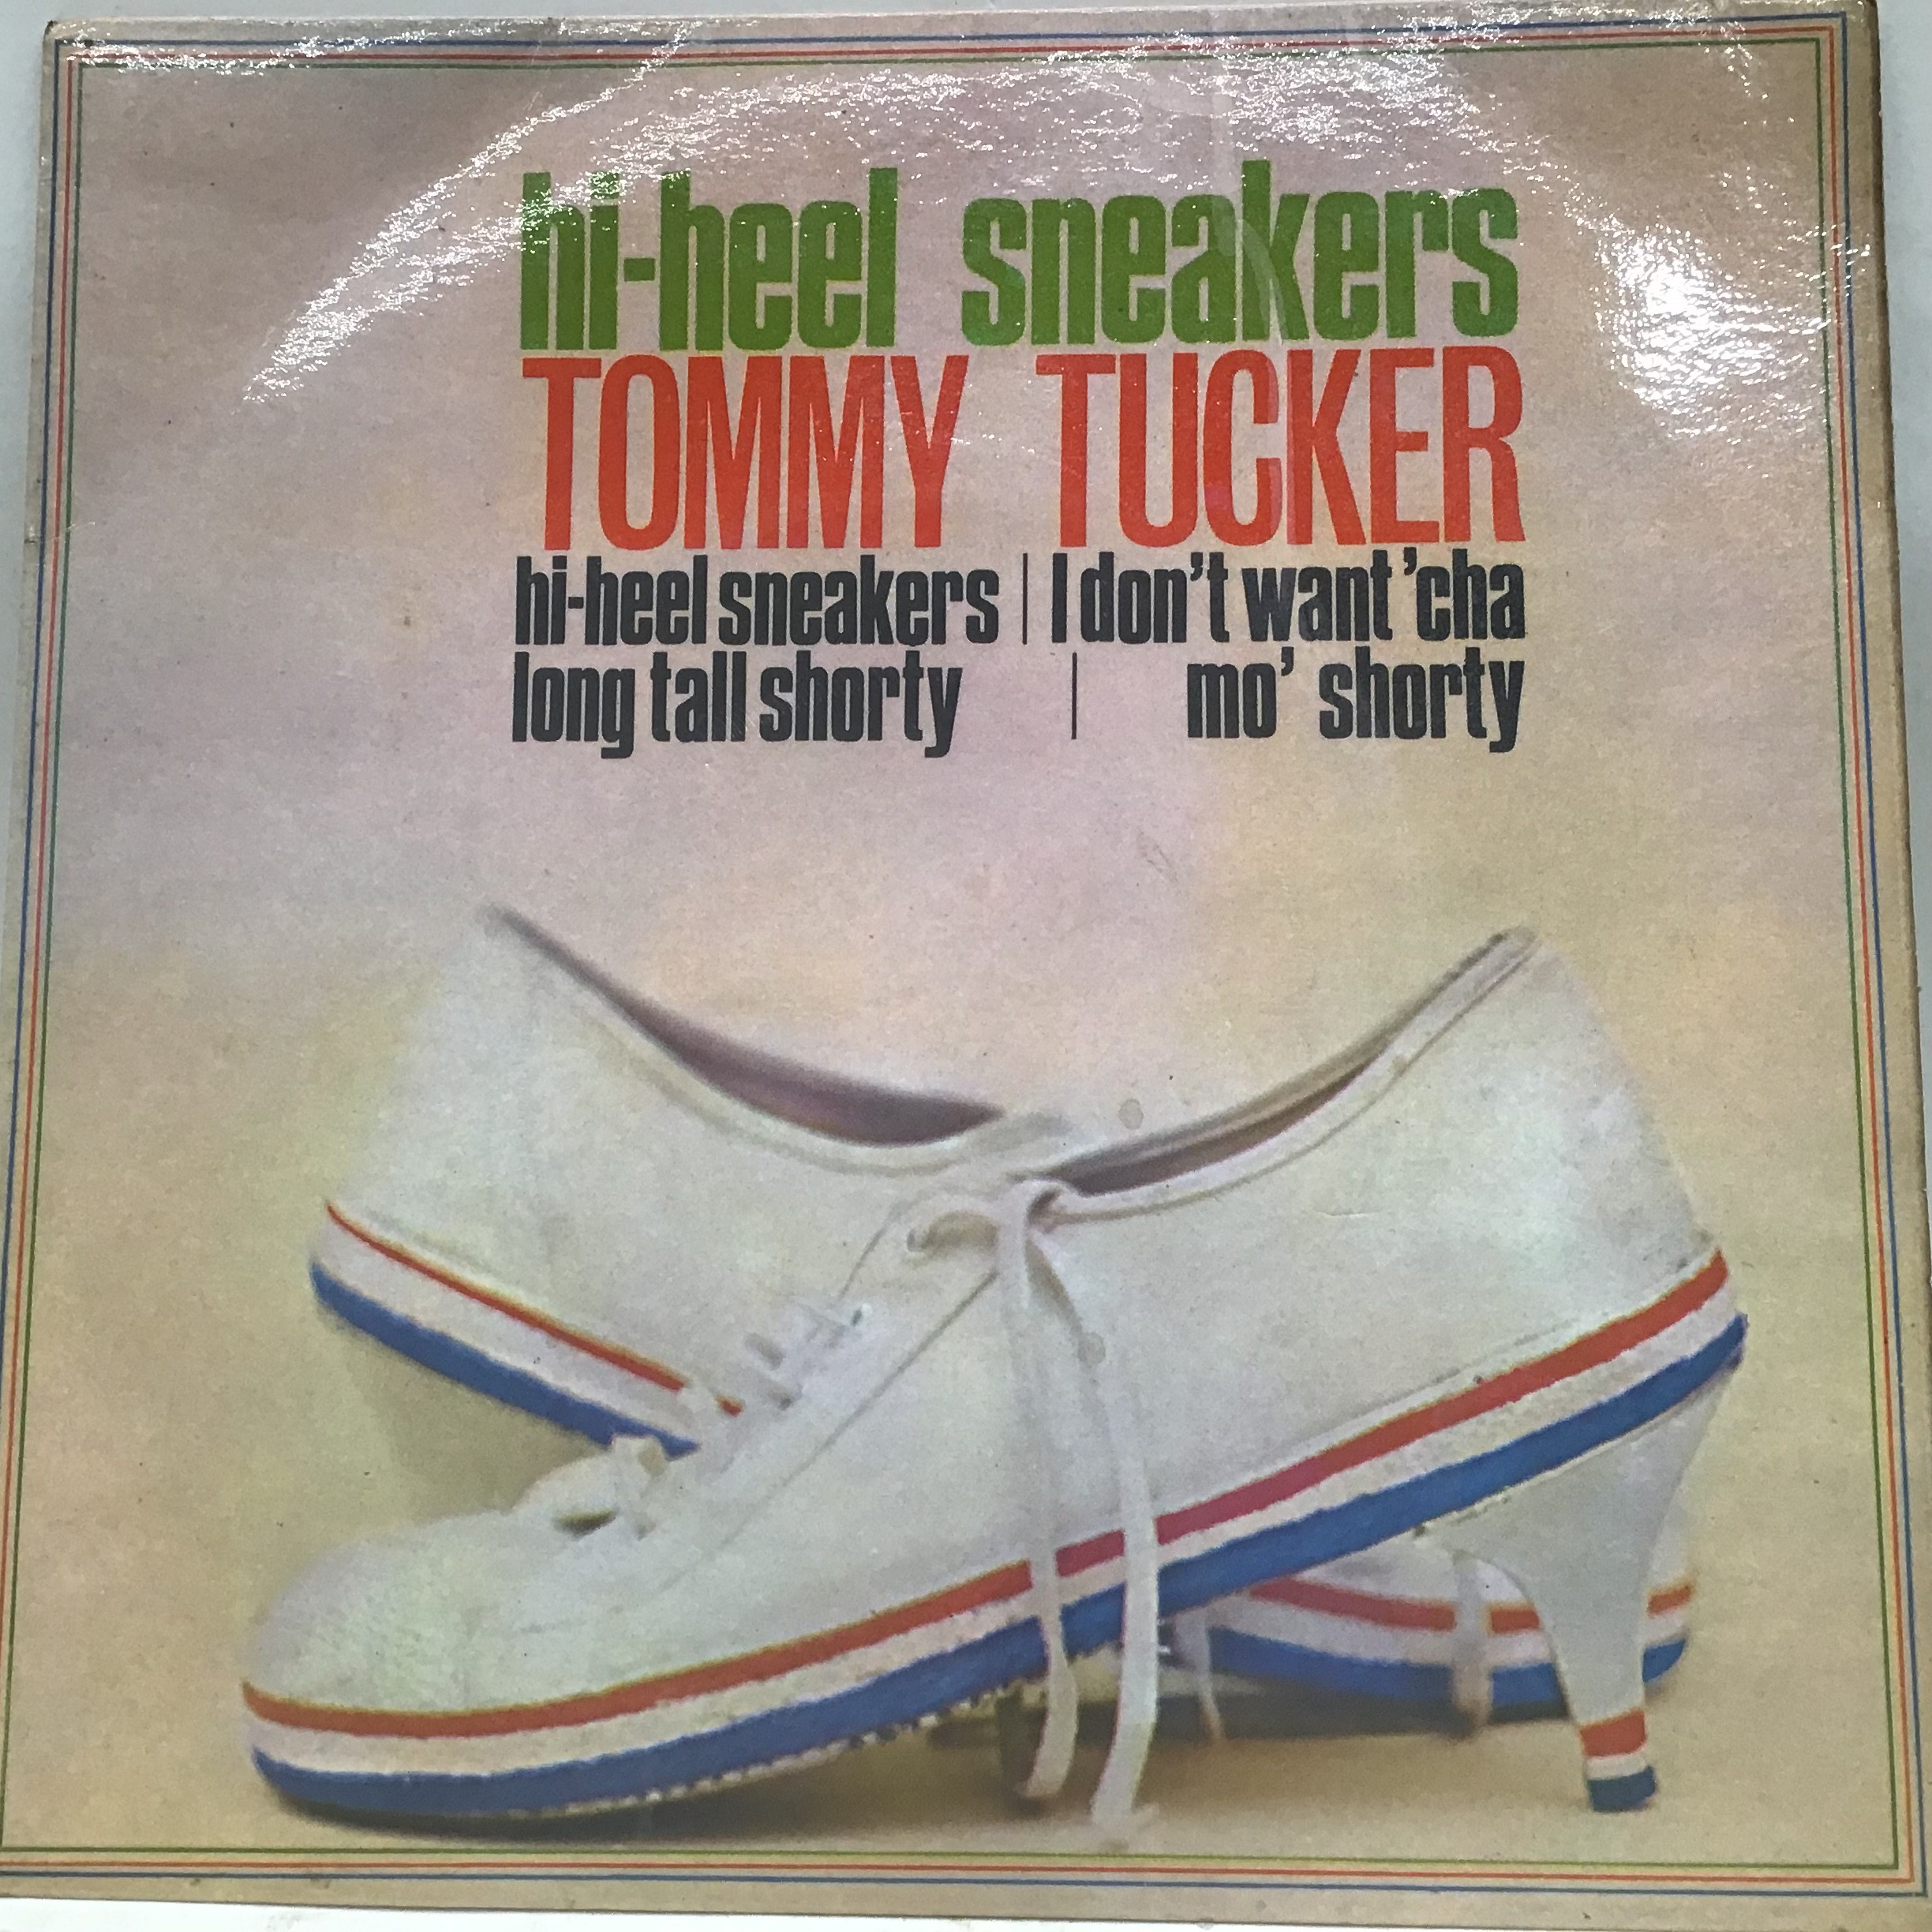 TOMMY TUCKER RARE E.P " HI-HEAL SNEAKERS. Super record here on Pye International NEP 44027 from 1964